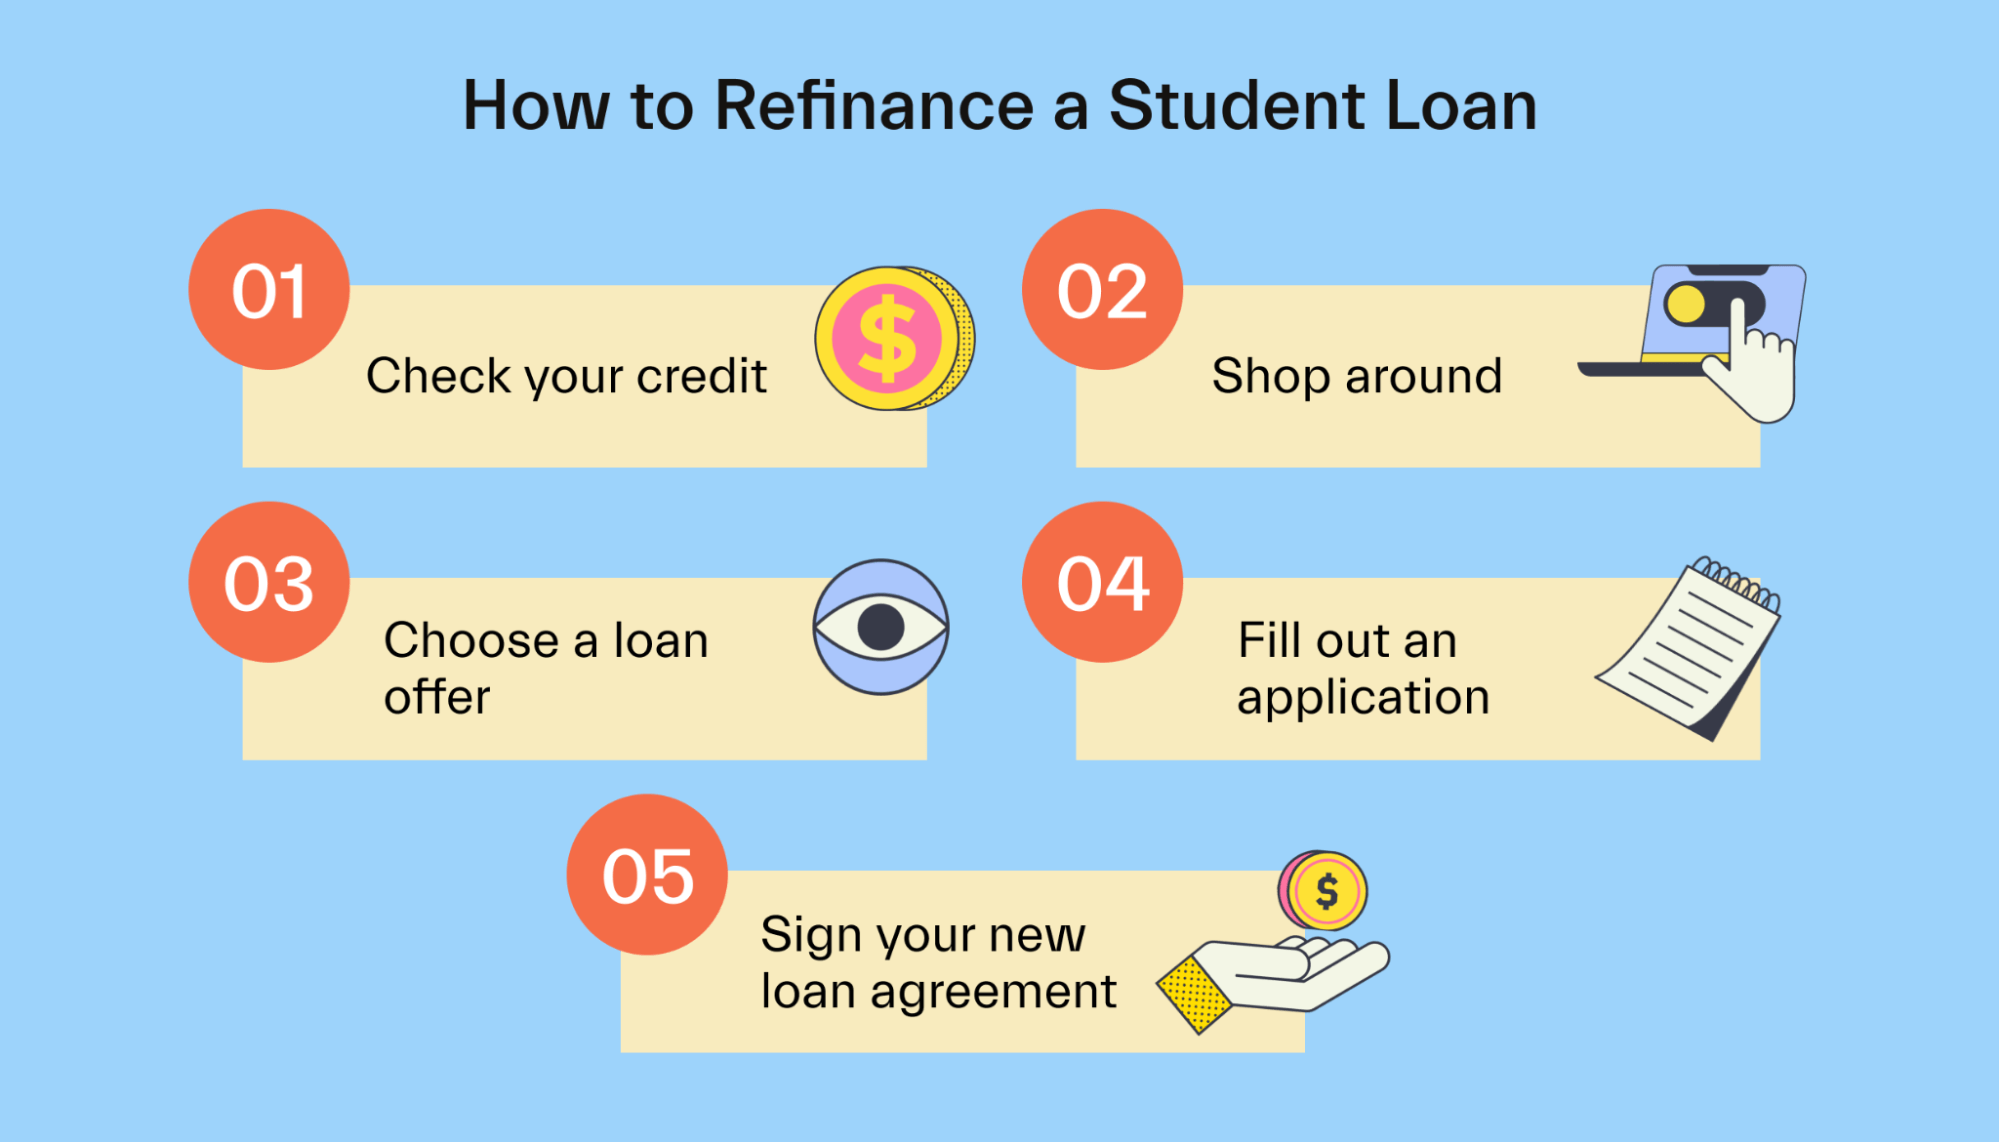 How to refinance a student loan